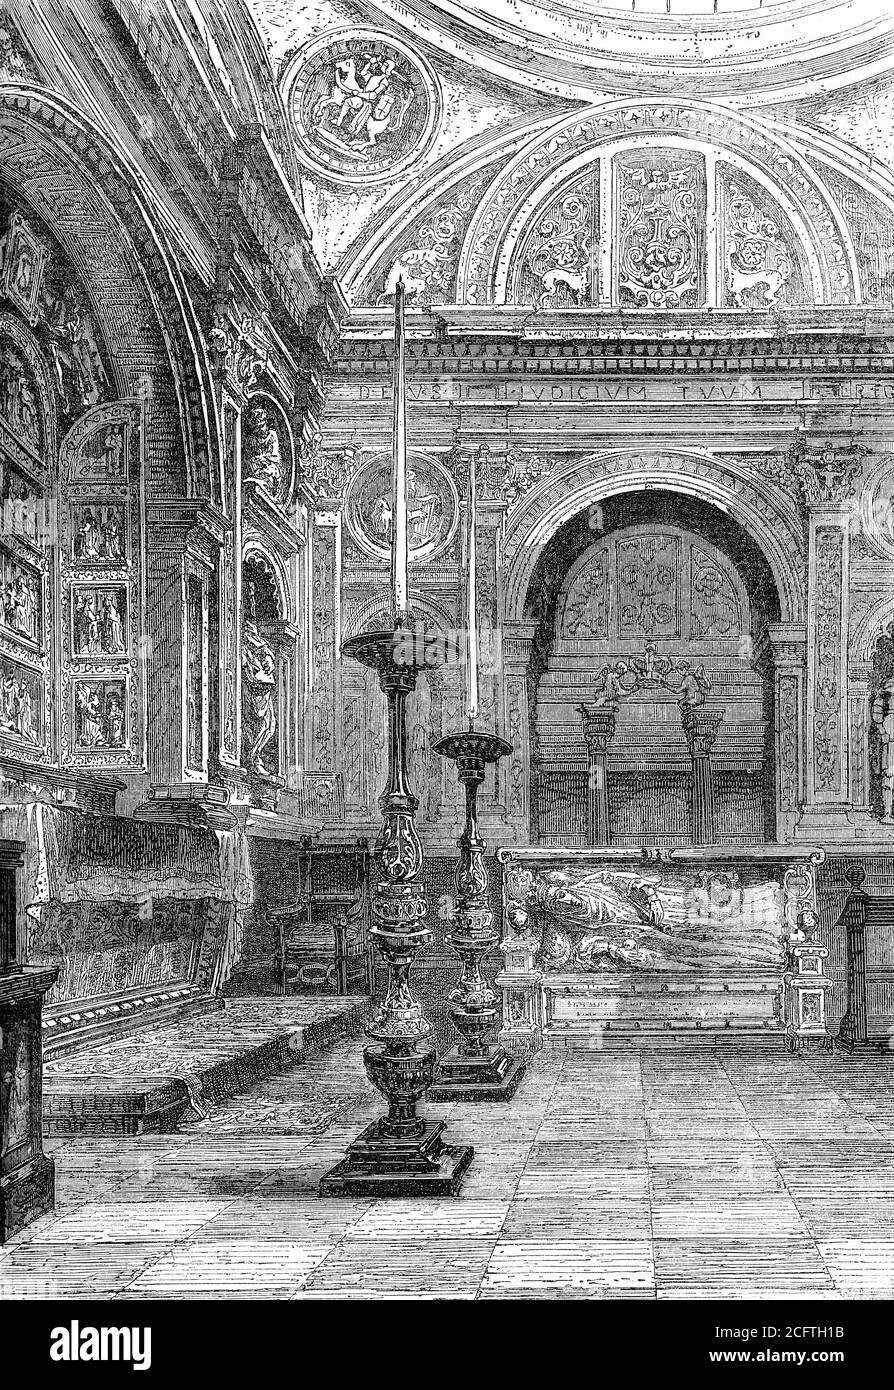 Engraving of the tomb of Anna Jagiellon in the Cathedral of Cracow. Anna (1523 – 1596) was Queen of Poland and Grand Duchess of Lithuania from 1575 to 1586. Illustration from 'The history of Protestantism' by James Aitken Wylie (1808-1890), pub. 1878 Stock Photo